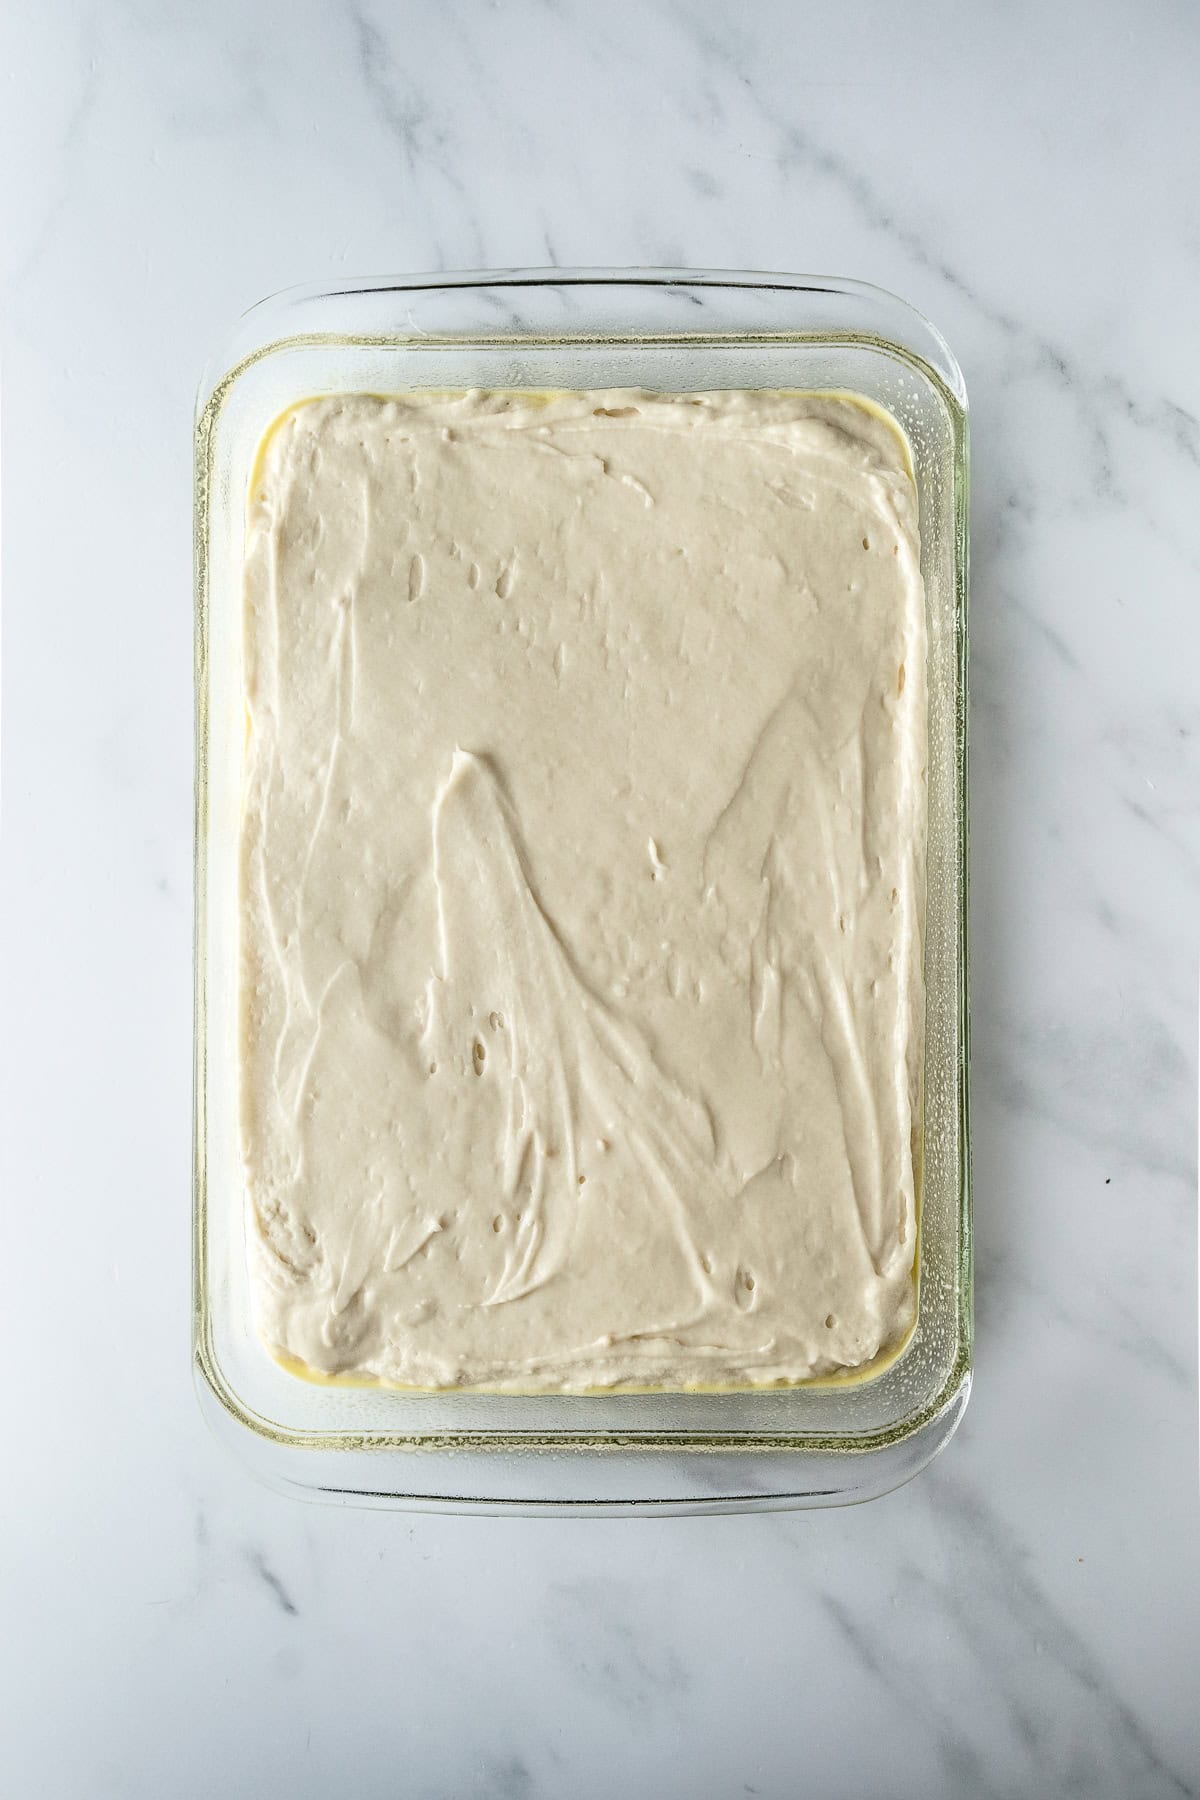 batter for vanilla cake in a baking dish on a white table.